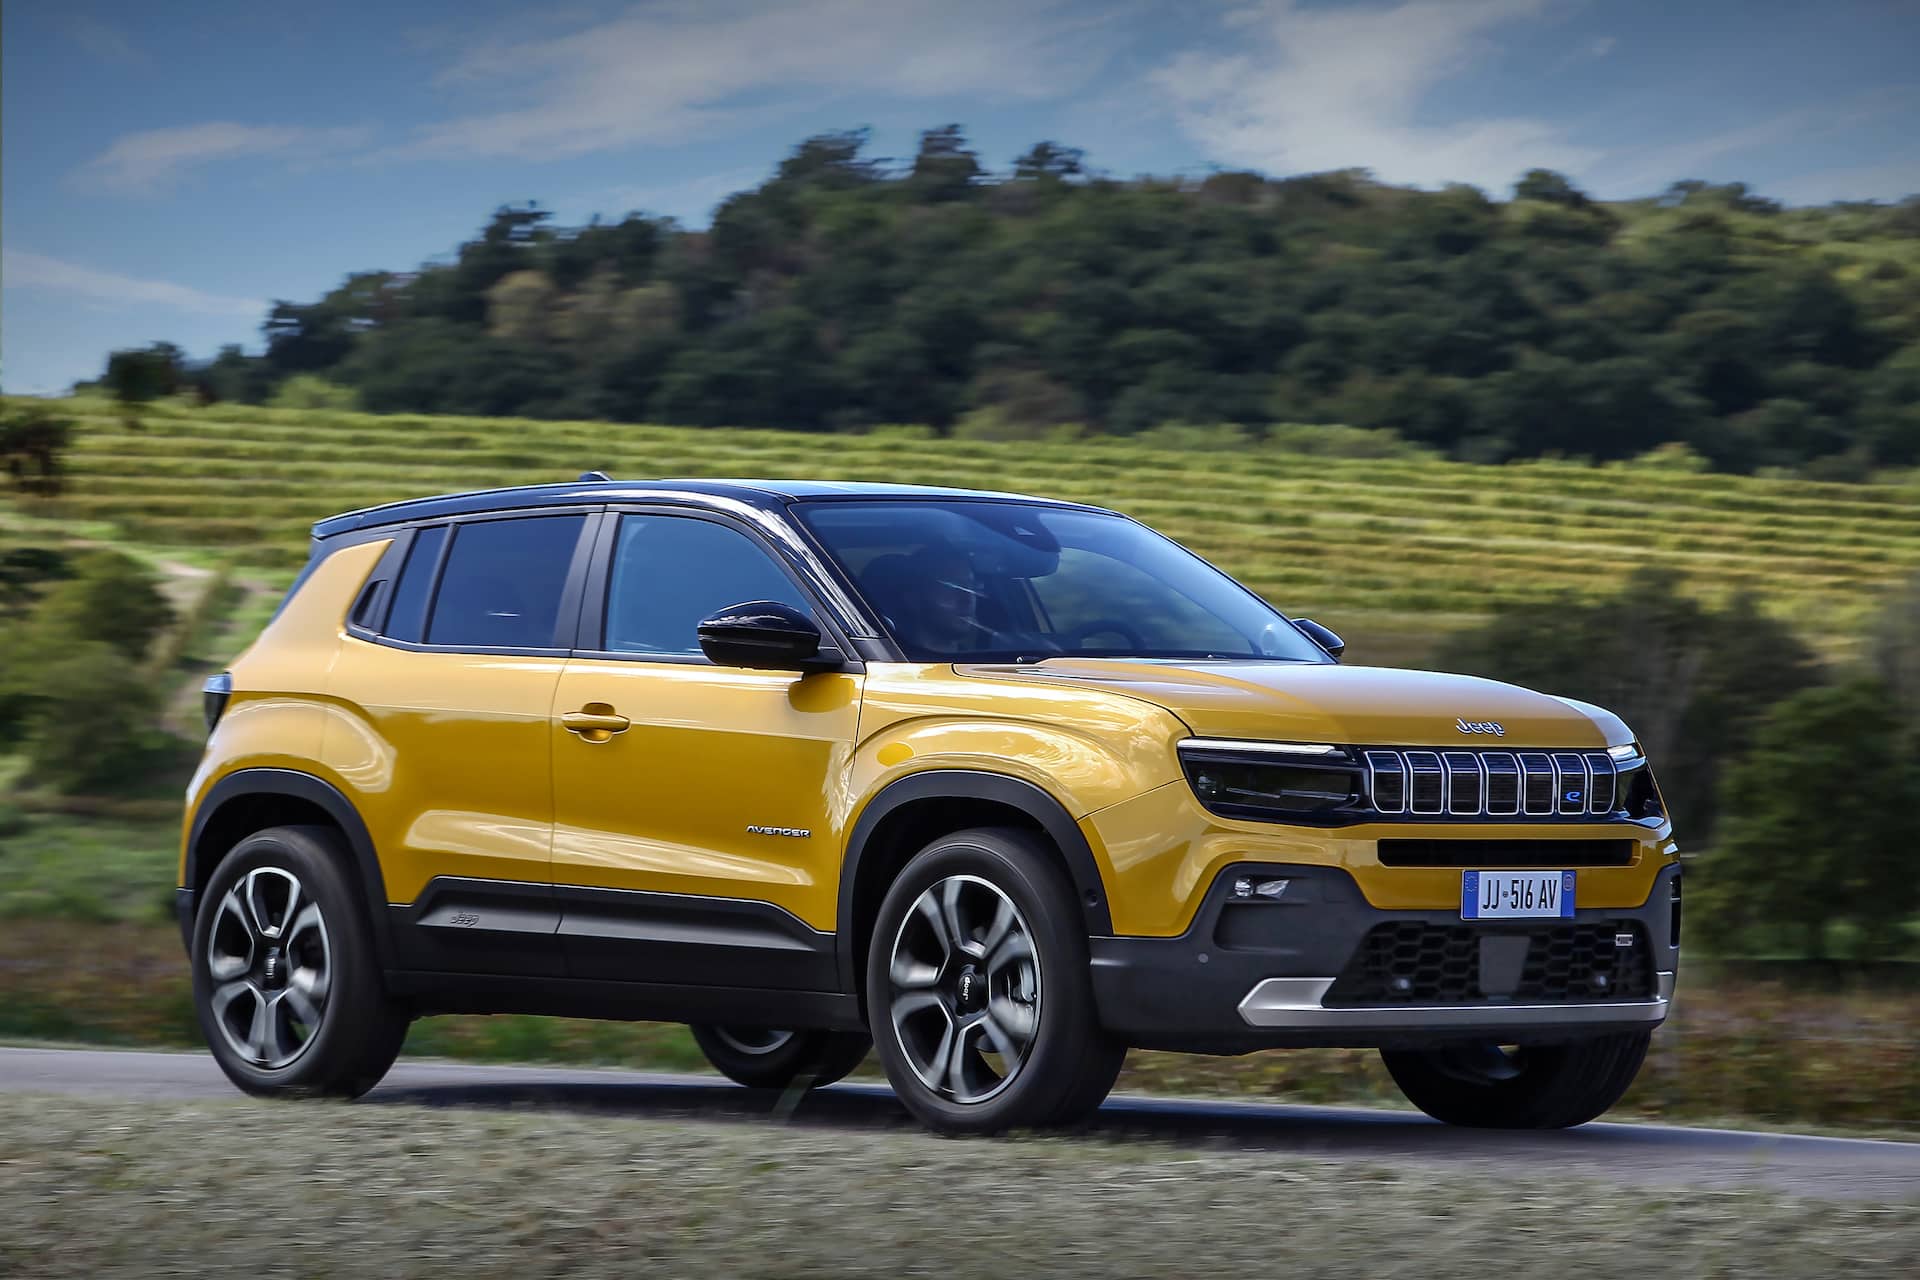 All new Jeep Avenger unveiled in Paris, the first-ever fully electric Jeep brand SUV